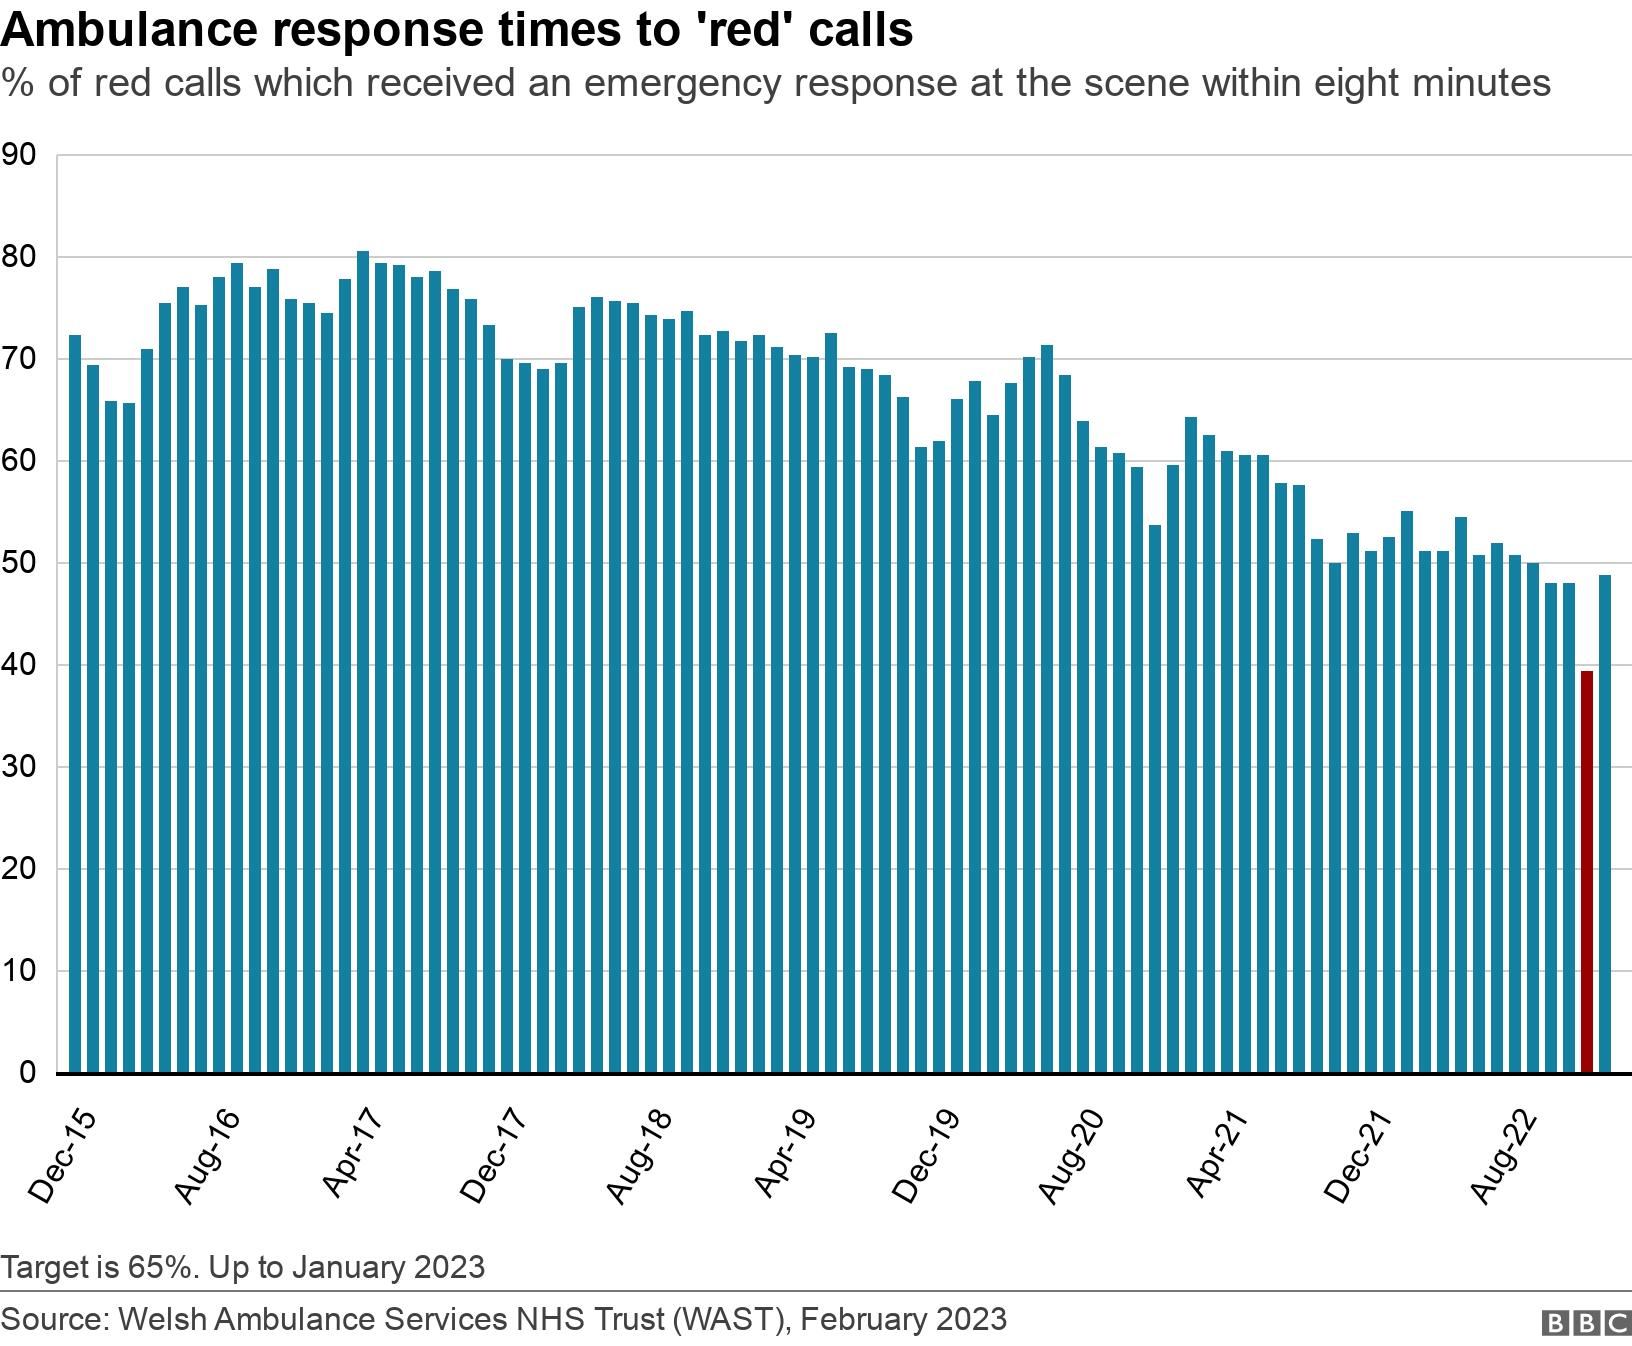 Ambulance response times to 'red' calls. % of red calls which received an emergency response at the scene within eight minutes.  Target is 65%. Up to January 2023.